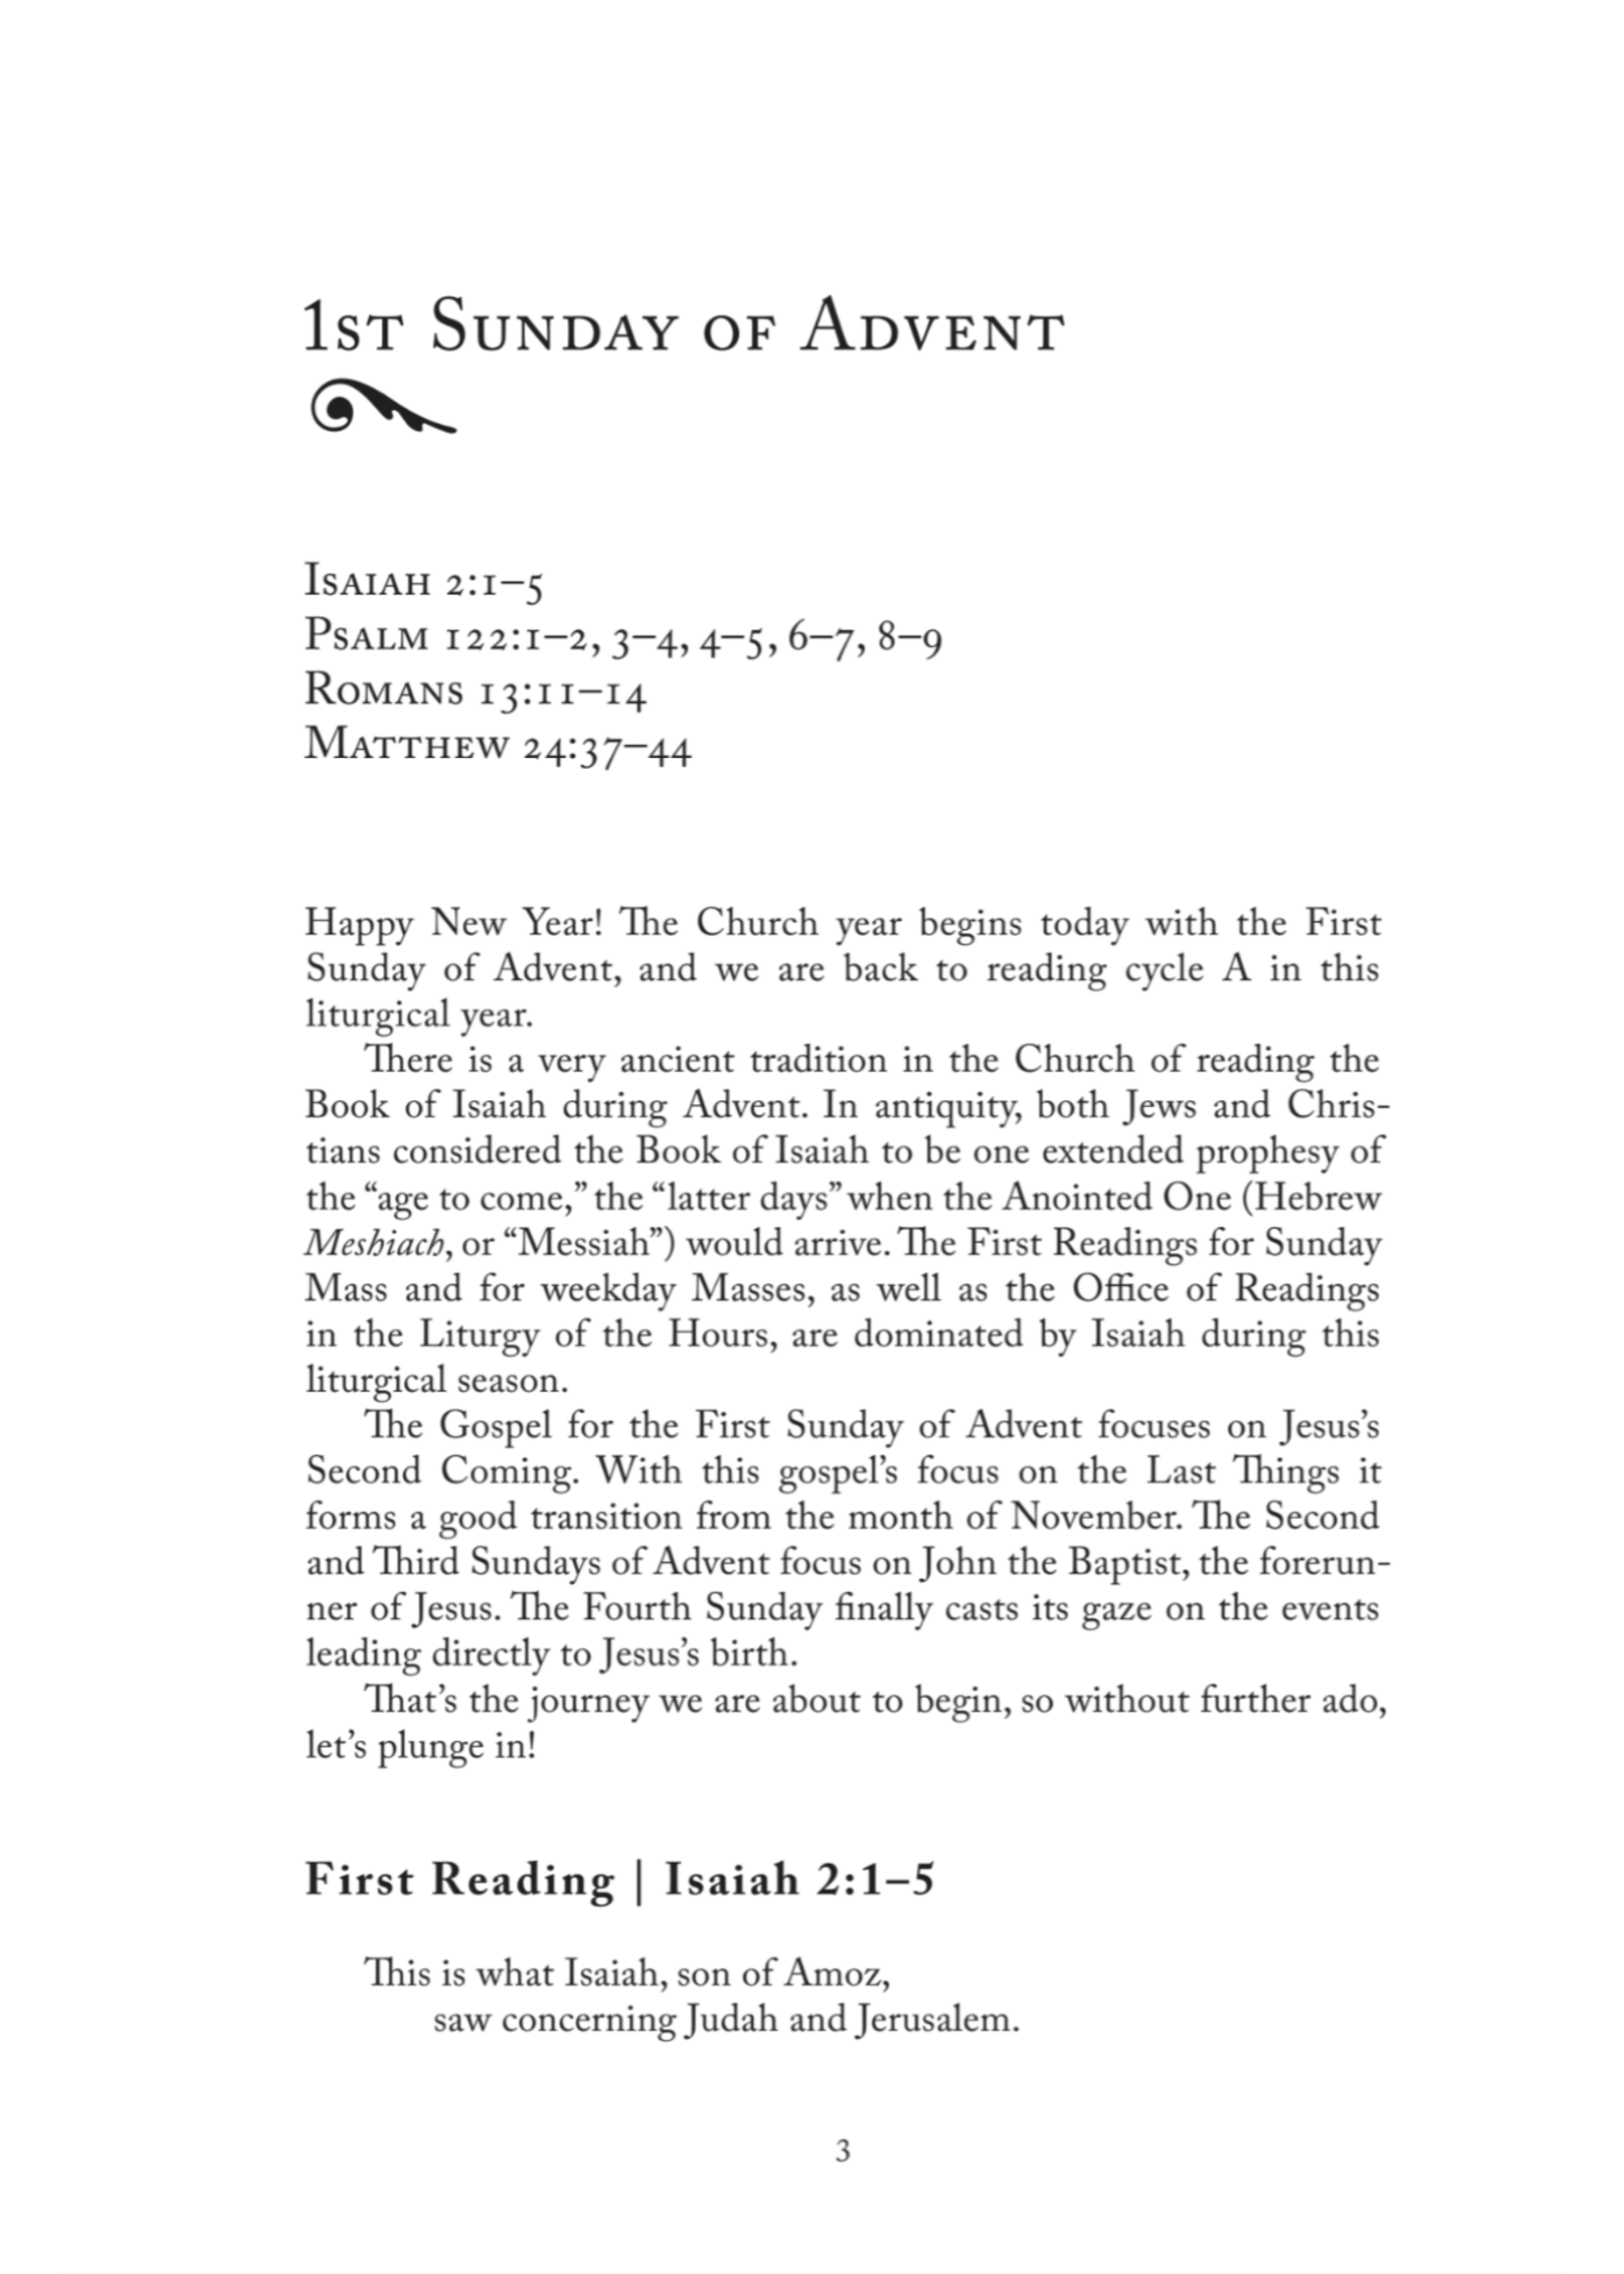 The Word of the Lord: Reflections on the Sunday Mass Readings for Year A